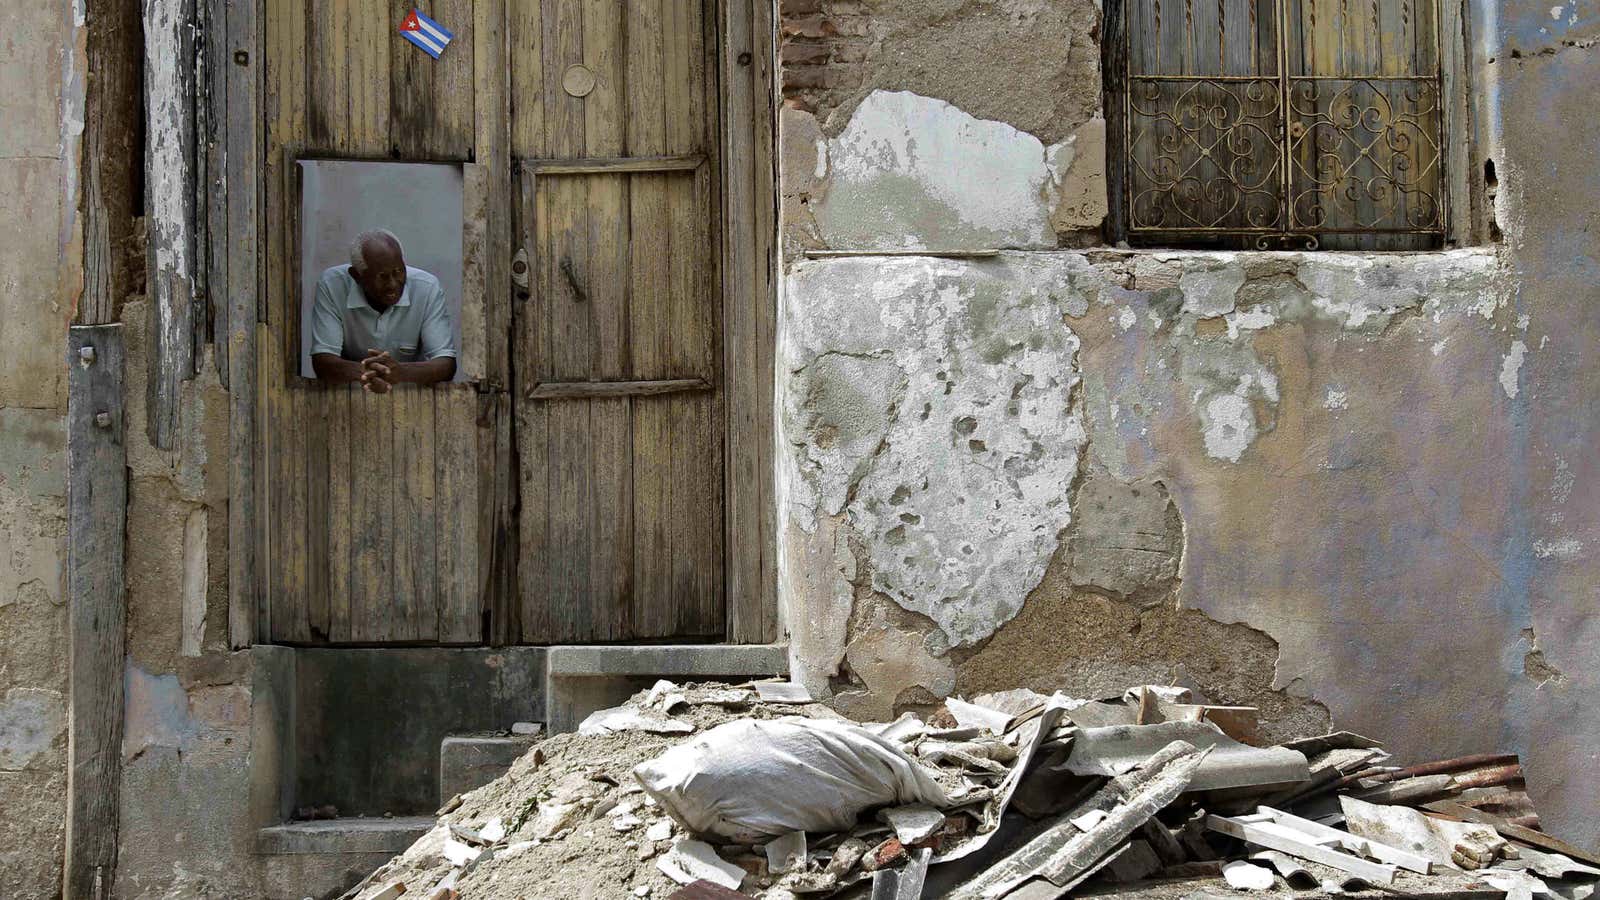 A man looks out from the window of his home to survey damage from Hurricane Sandy in Santiago de Cuba, Cuba.